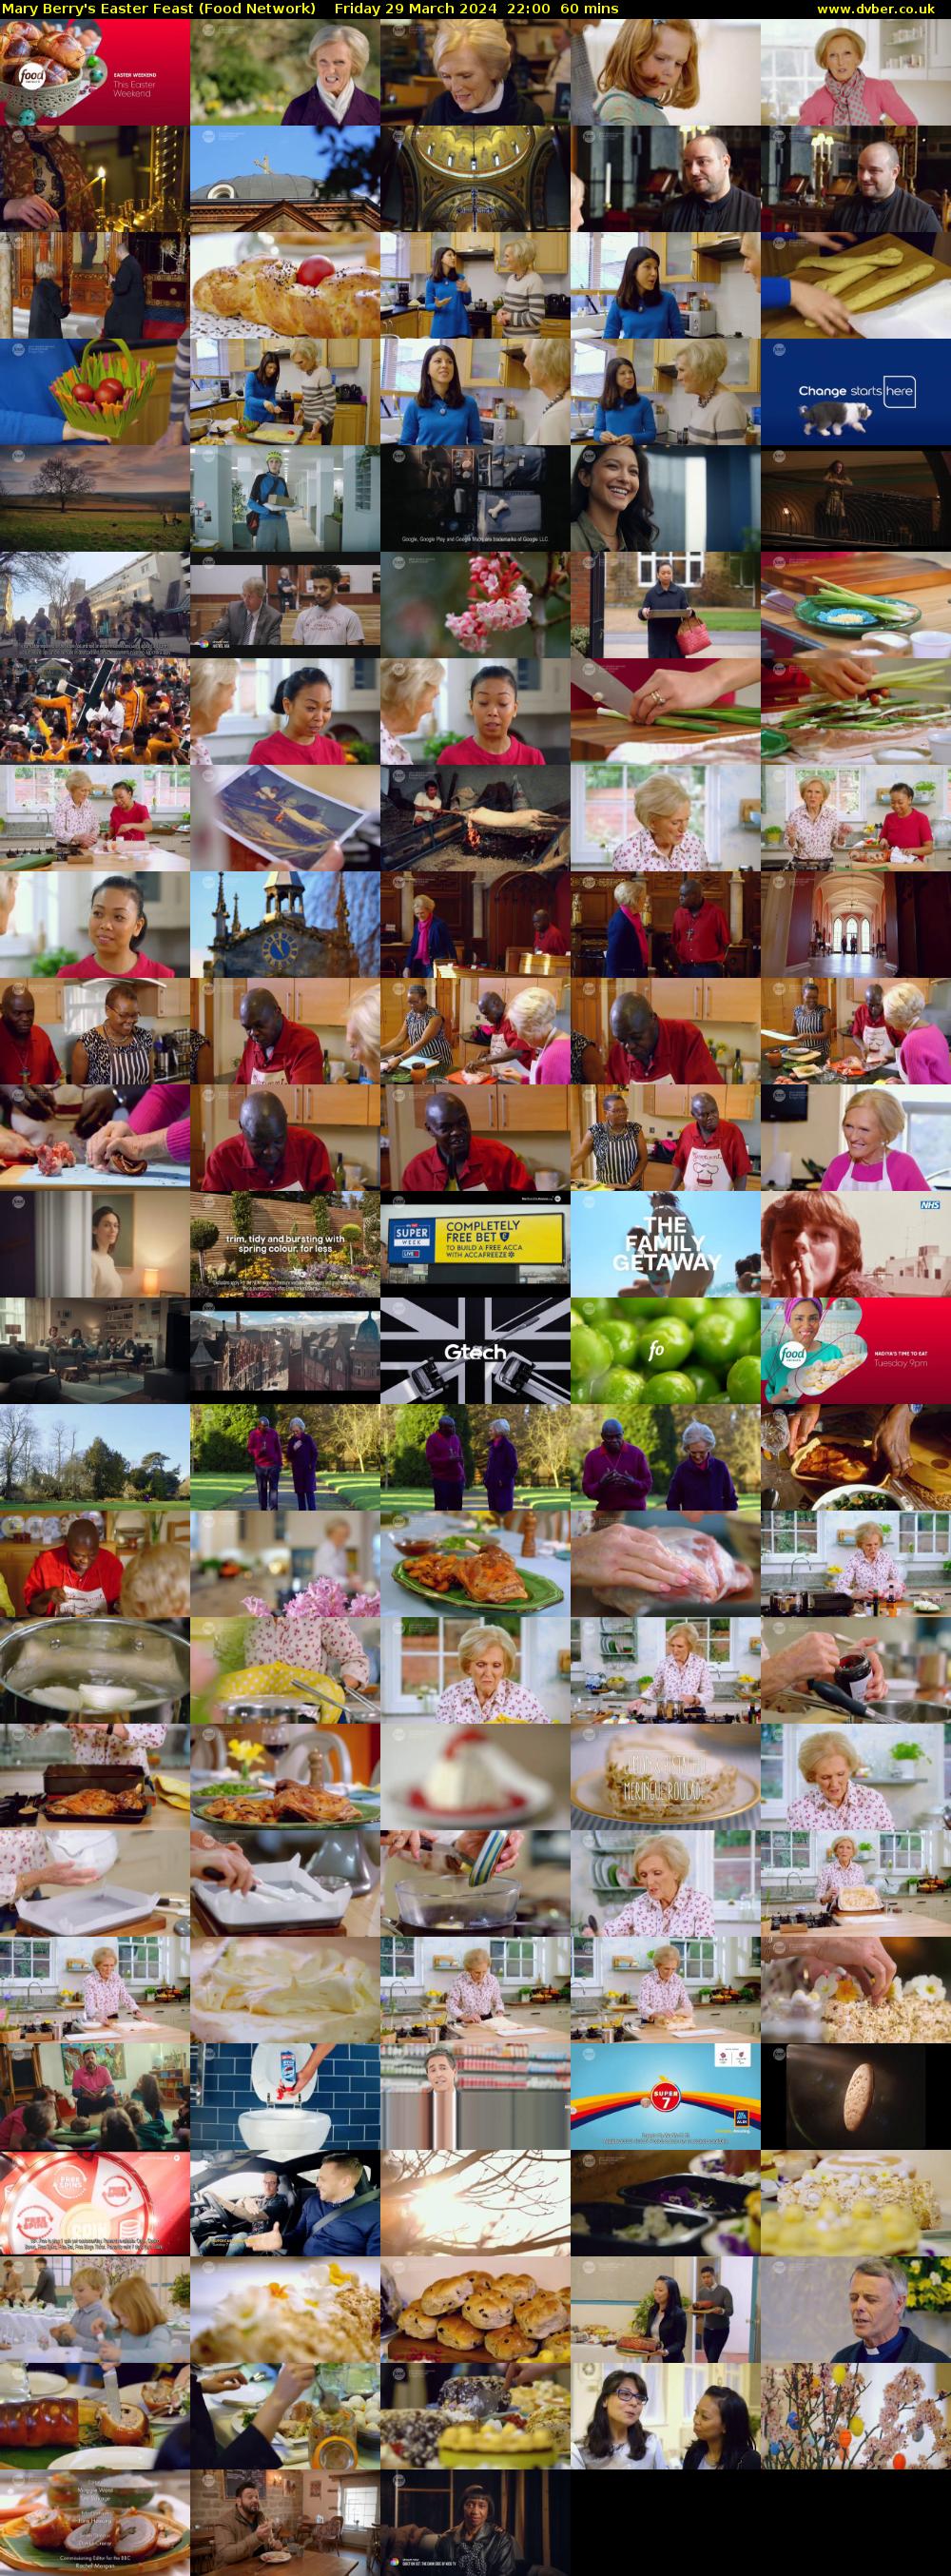 Mary Berry's Easter Feast (Food Network) Friday 29 March 2024 22:00 - 23:00